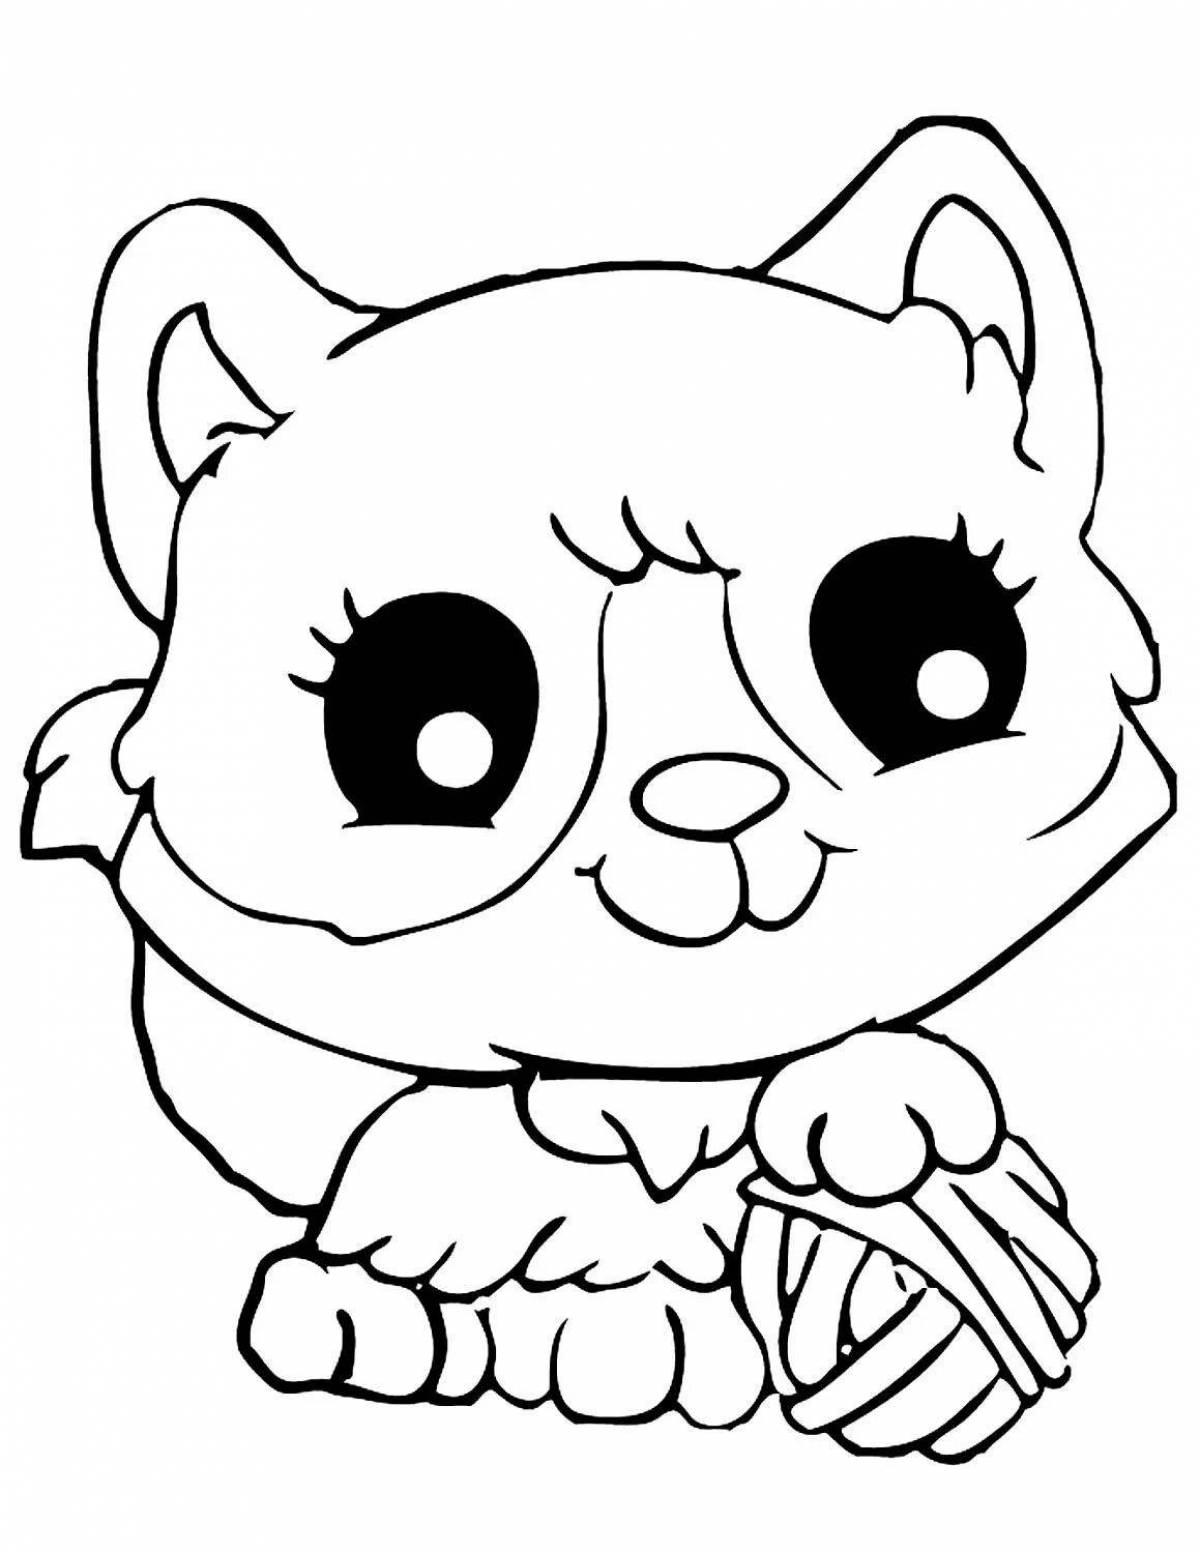 Fancy animals coloring page